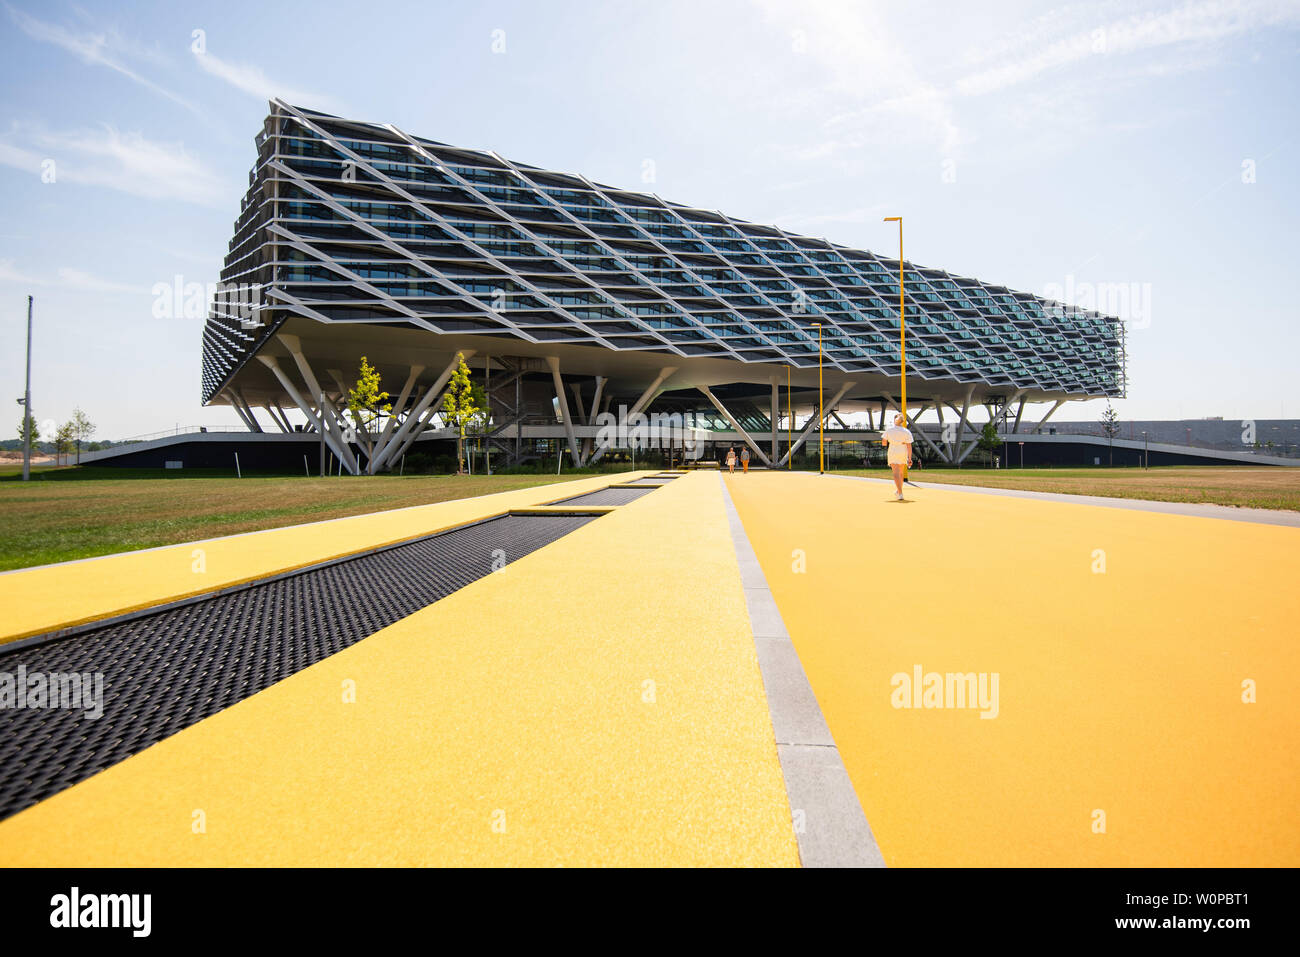 Herzogenaurach, Germany. 26th June, 2019. The new office building "Arena"  by Adidas. On the left in the picture trampolines for the employees are  worked into the path. In the 70th year of